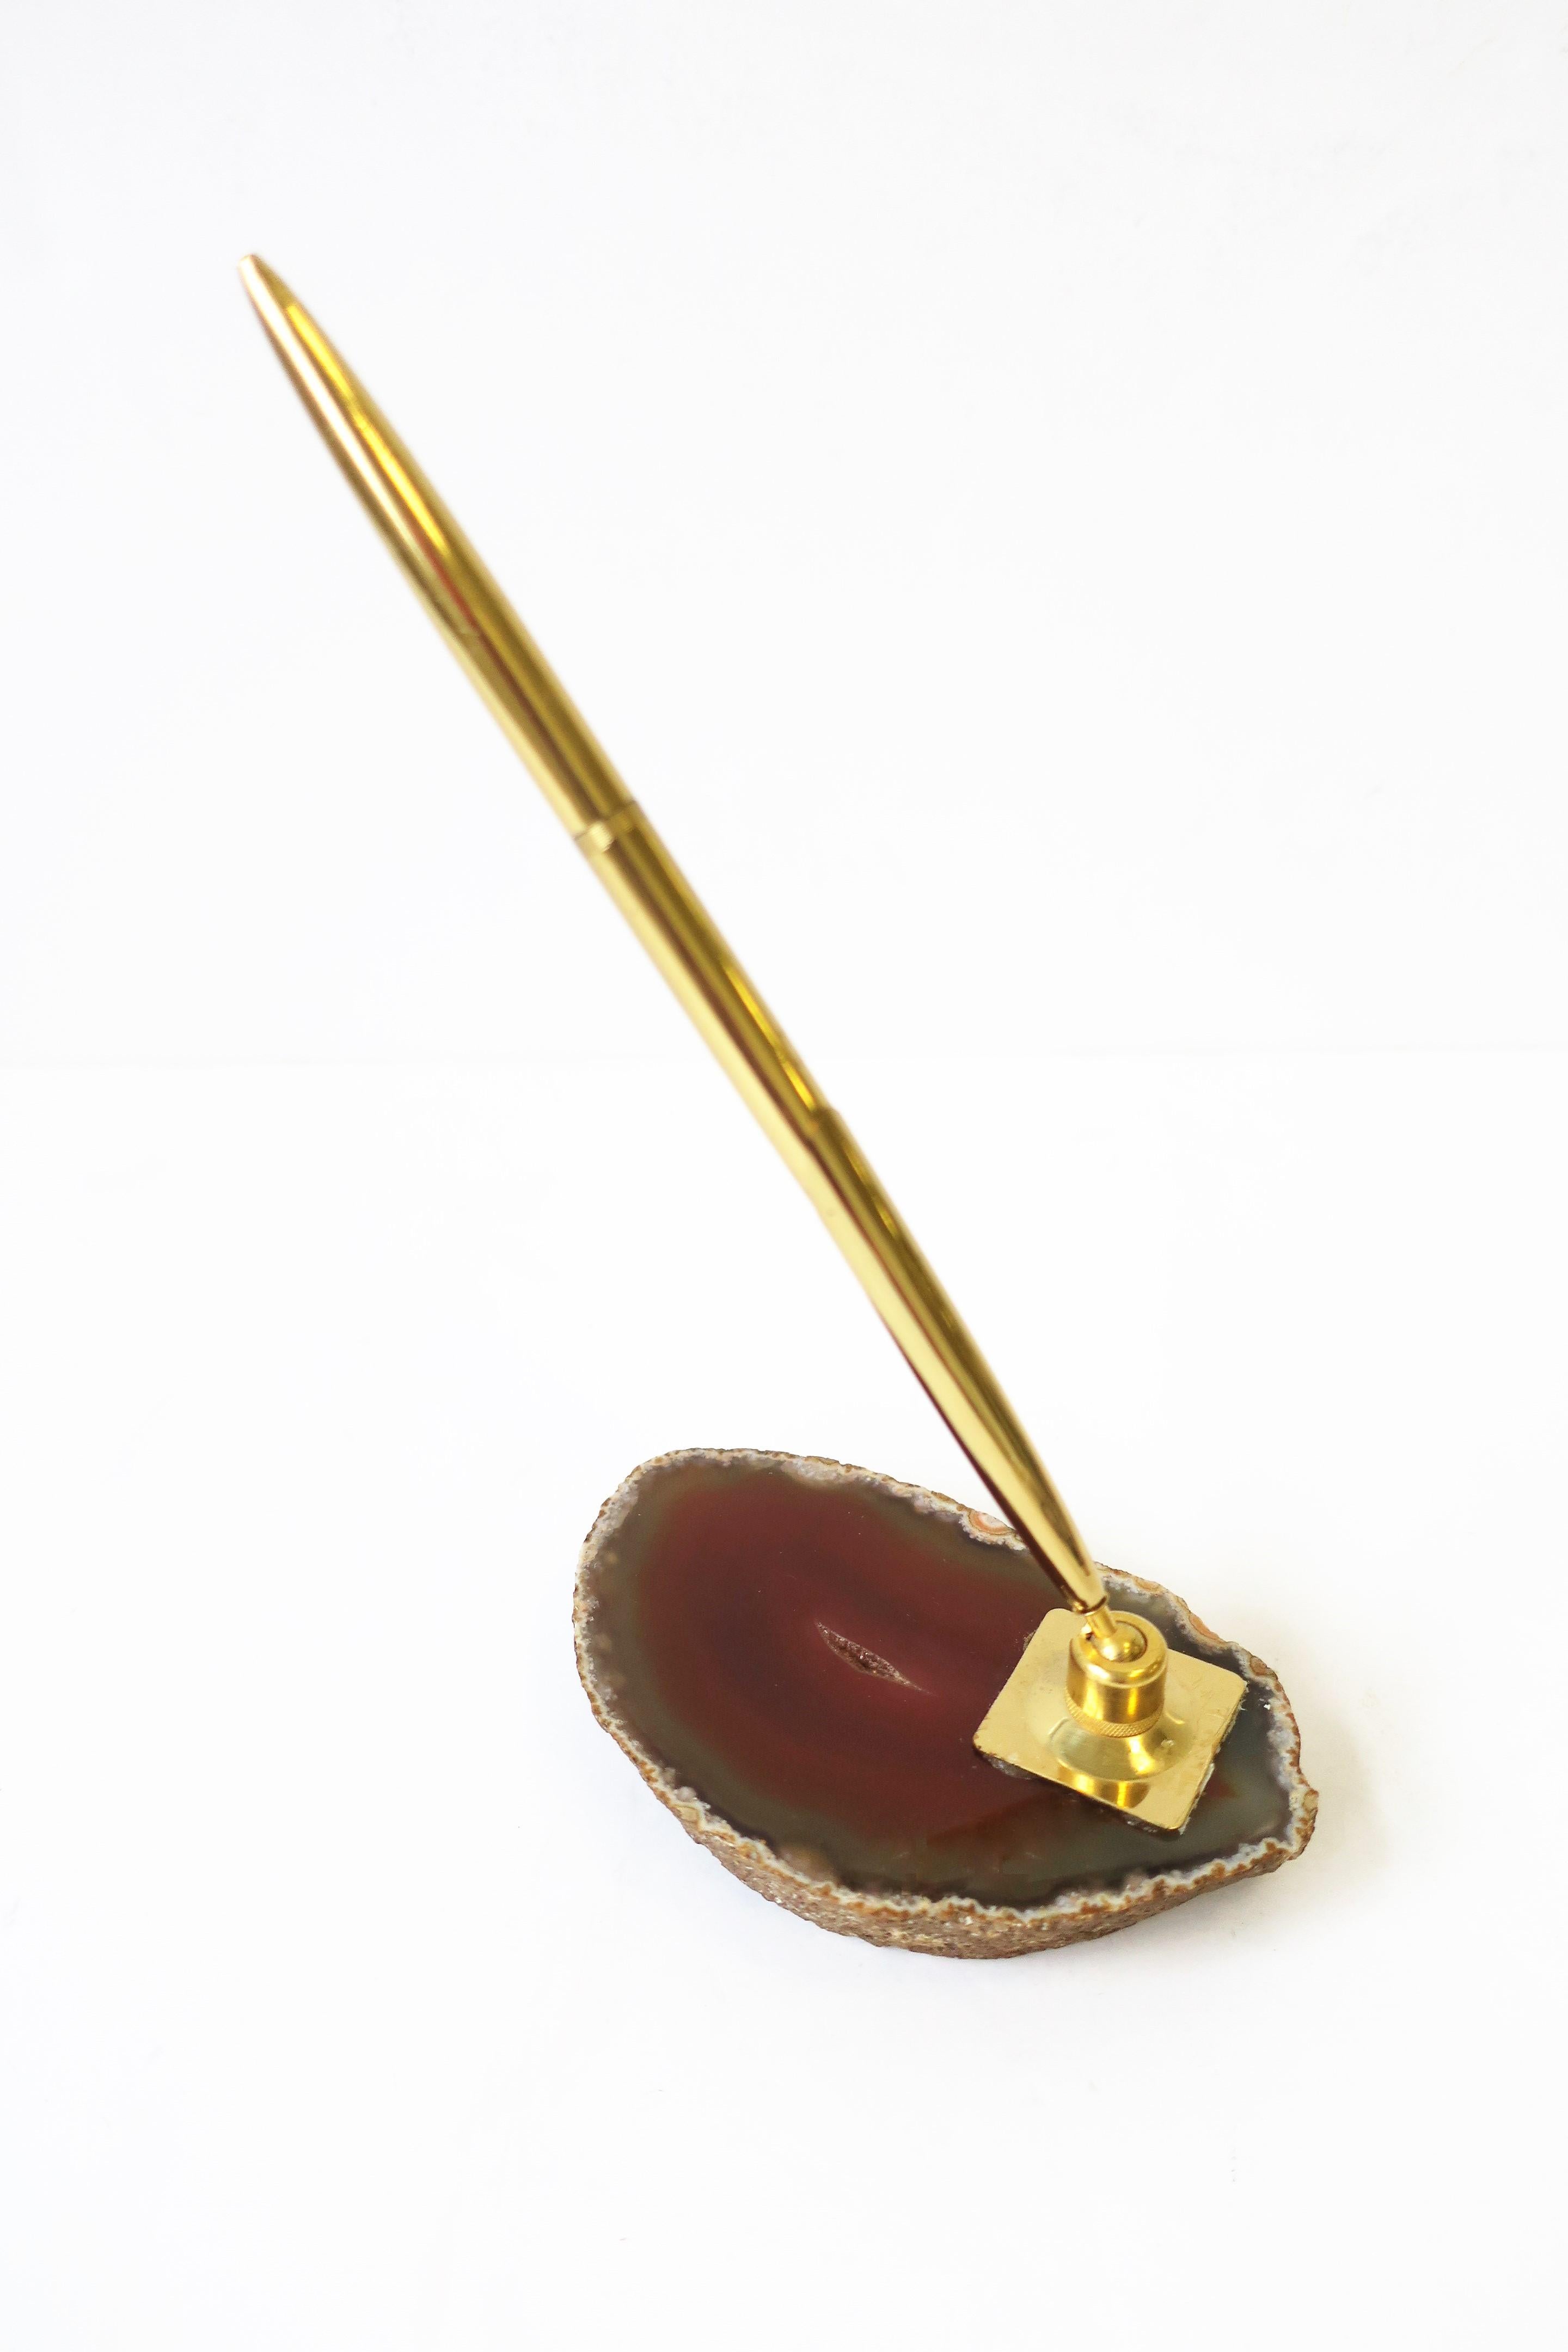 Agate Onyx and Brass Desk Pen Holder, circa 1970s In Good Condition For Sale In New York, NY